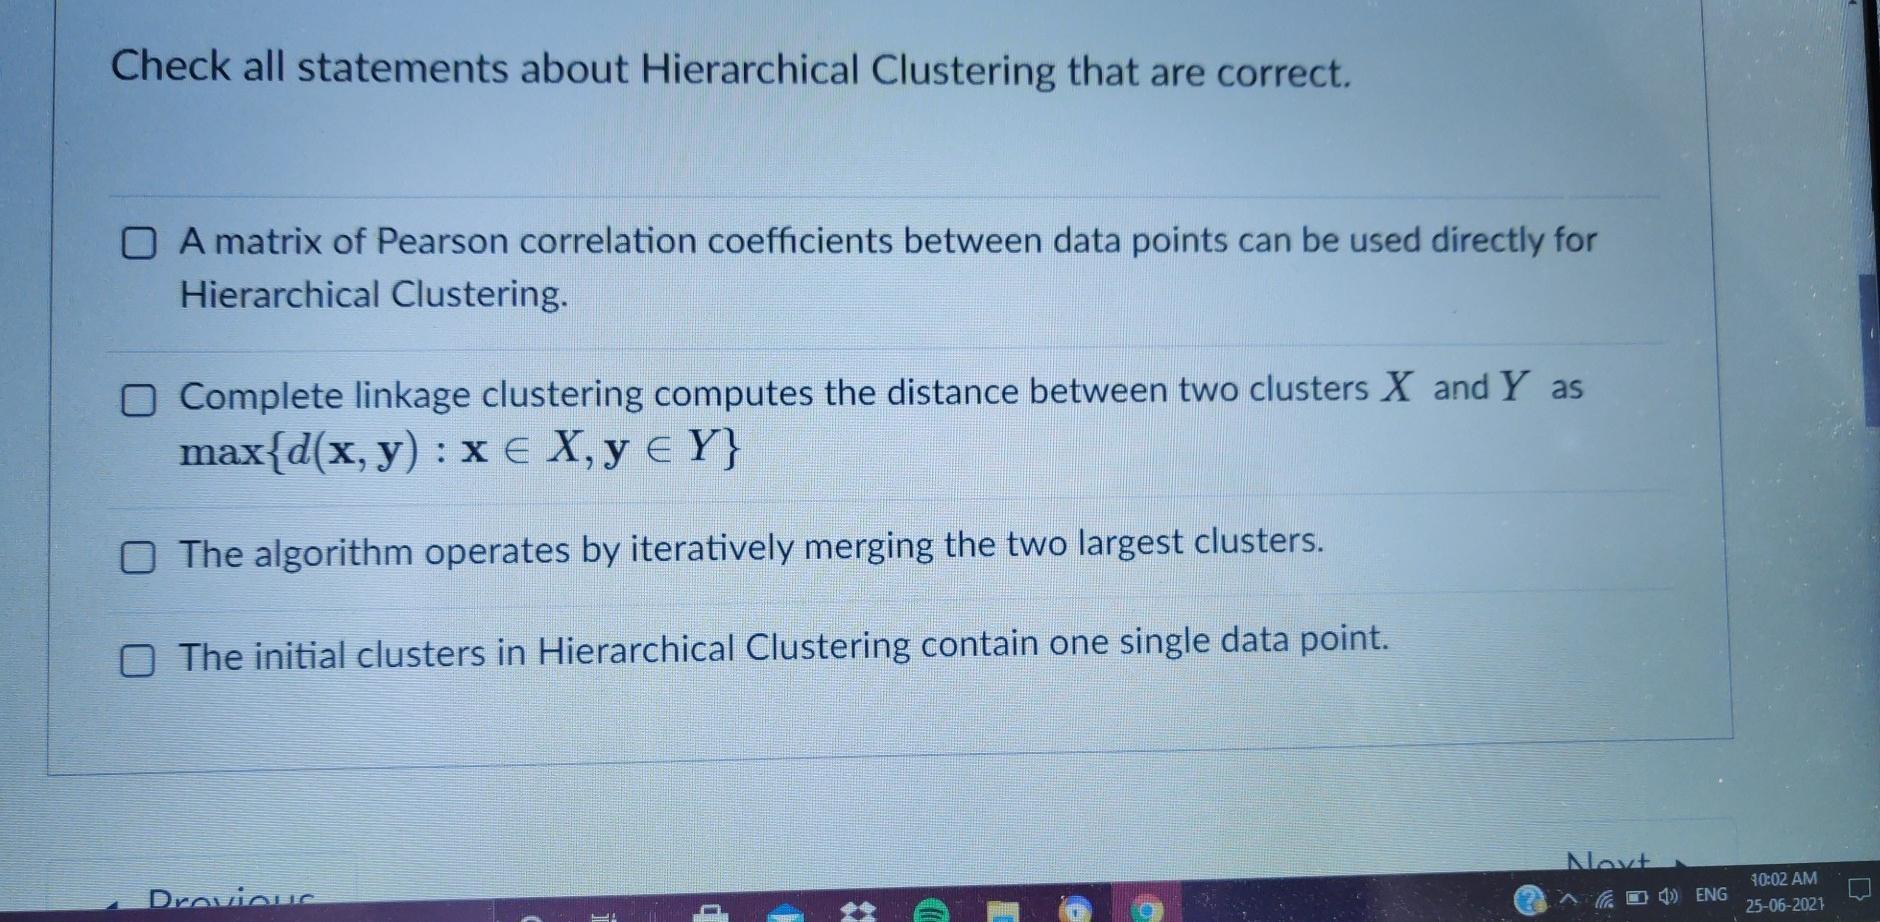 Check all statements about Hierarchical Clustering that are correct. OA matrix of Pearson correlation